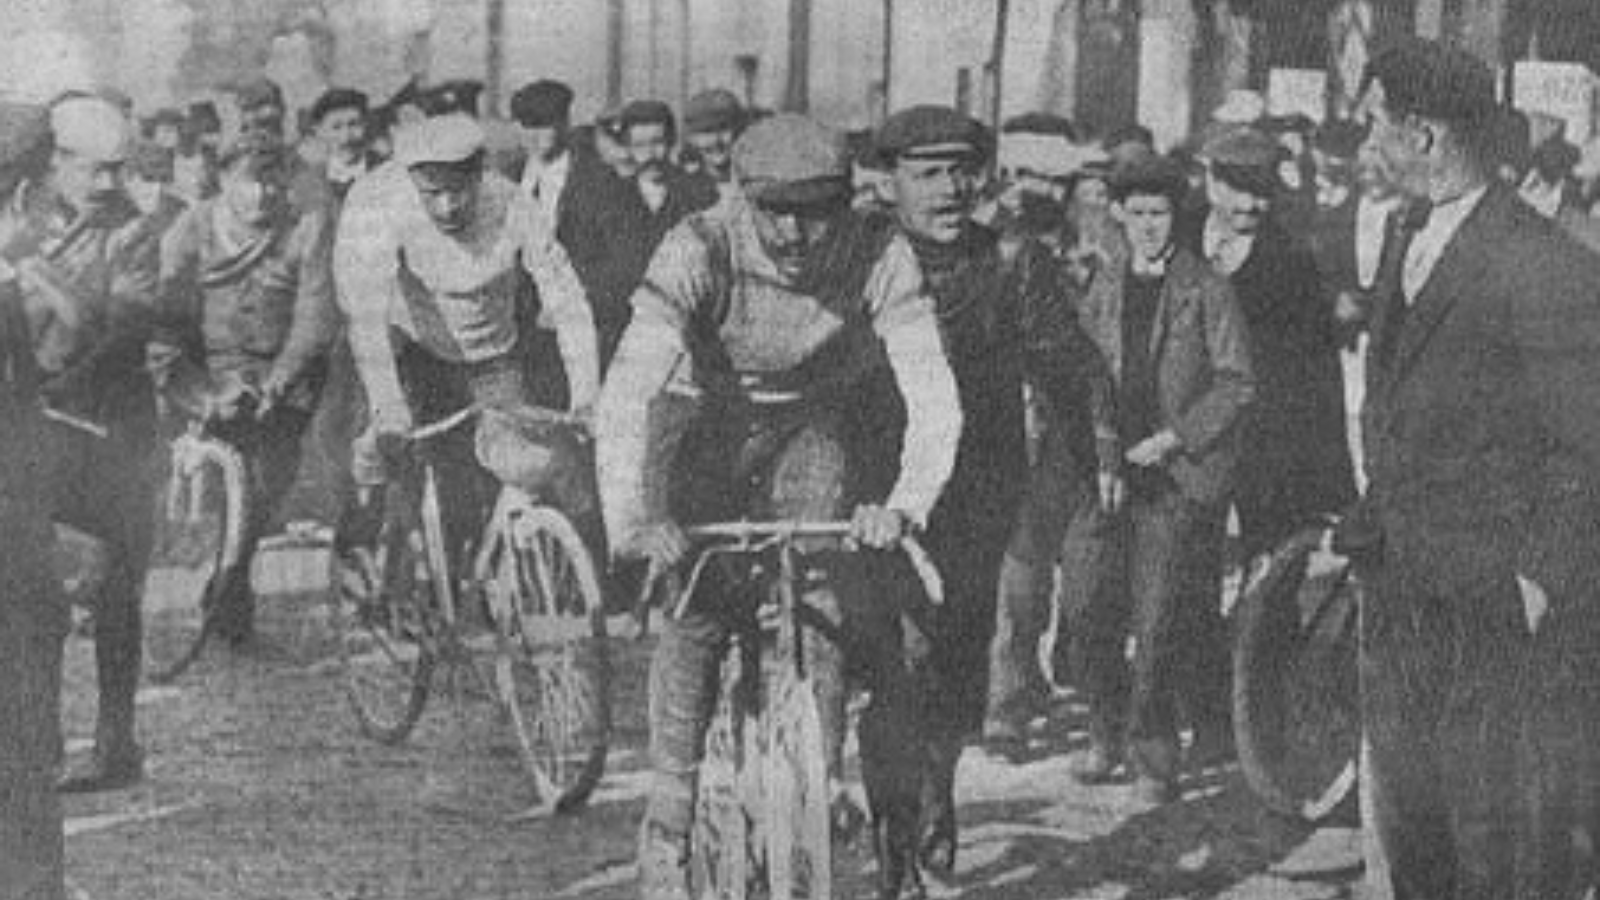 Cyclists at the Tour de France 1904, which was marred by serious cheating scandals